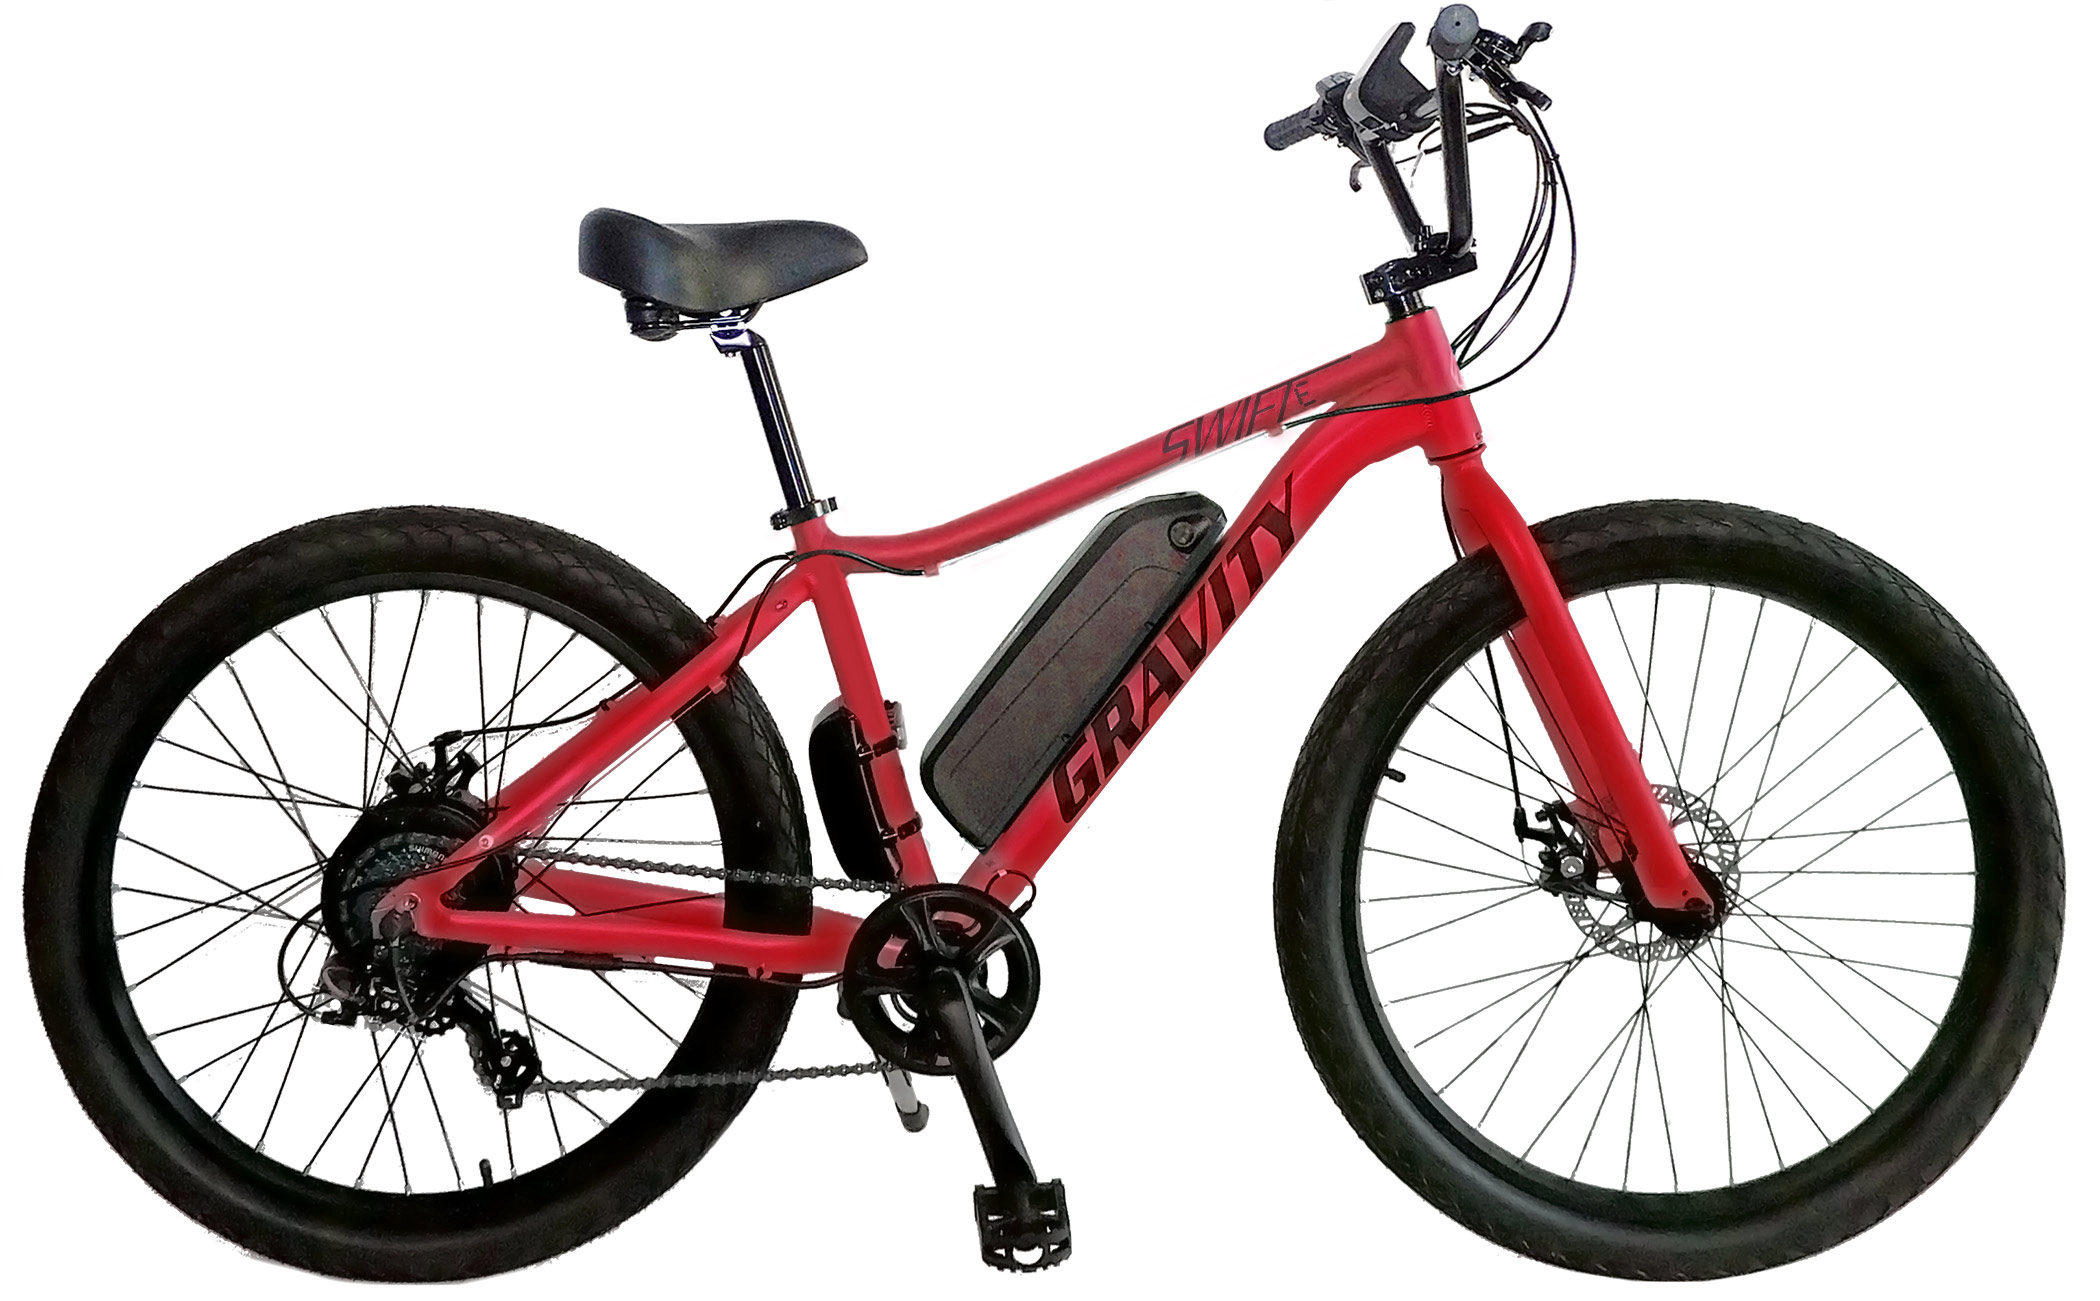 Save up to 60% off new Flat Bar Road Bikes - Gravity Electric Swift E, 7  Speed Super Hybrid eBikes